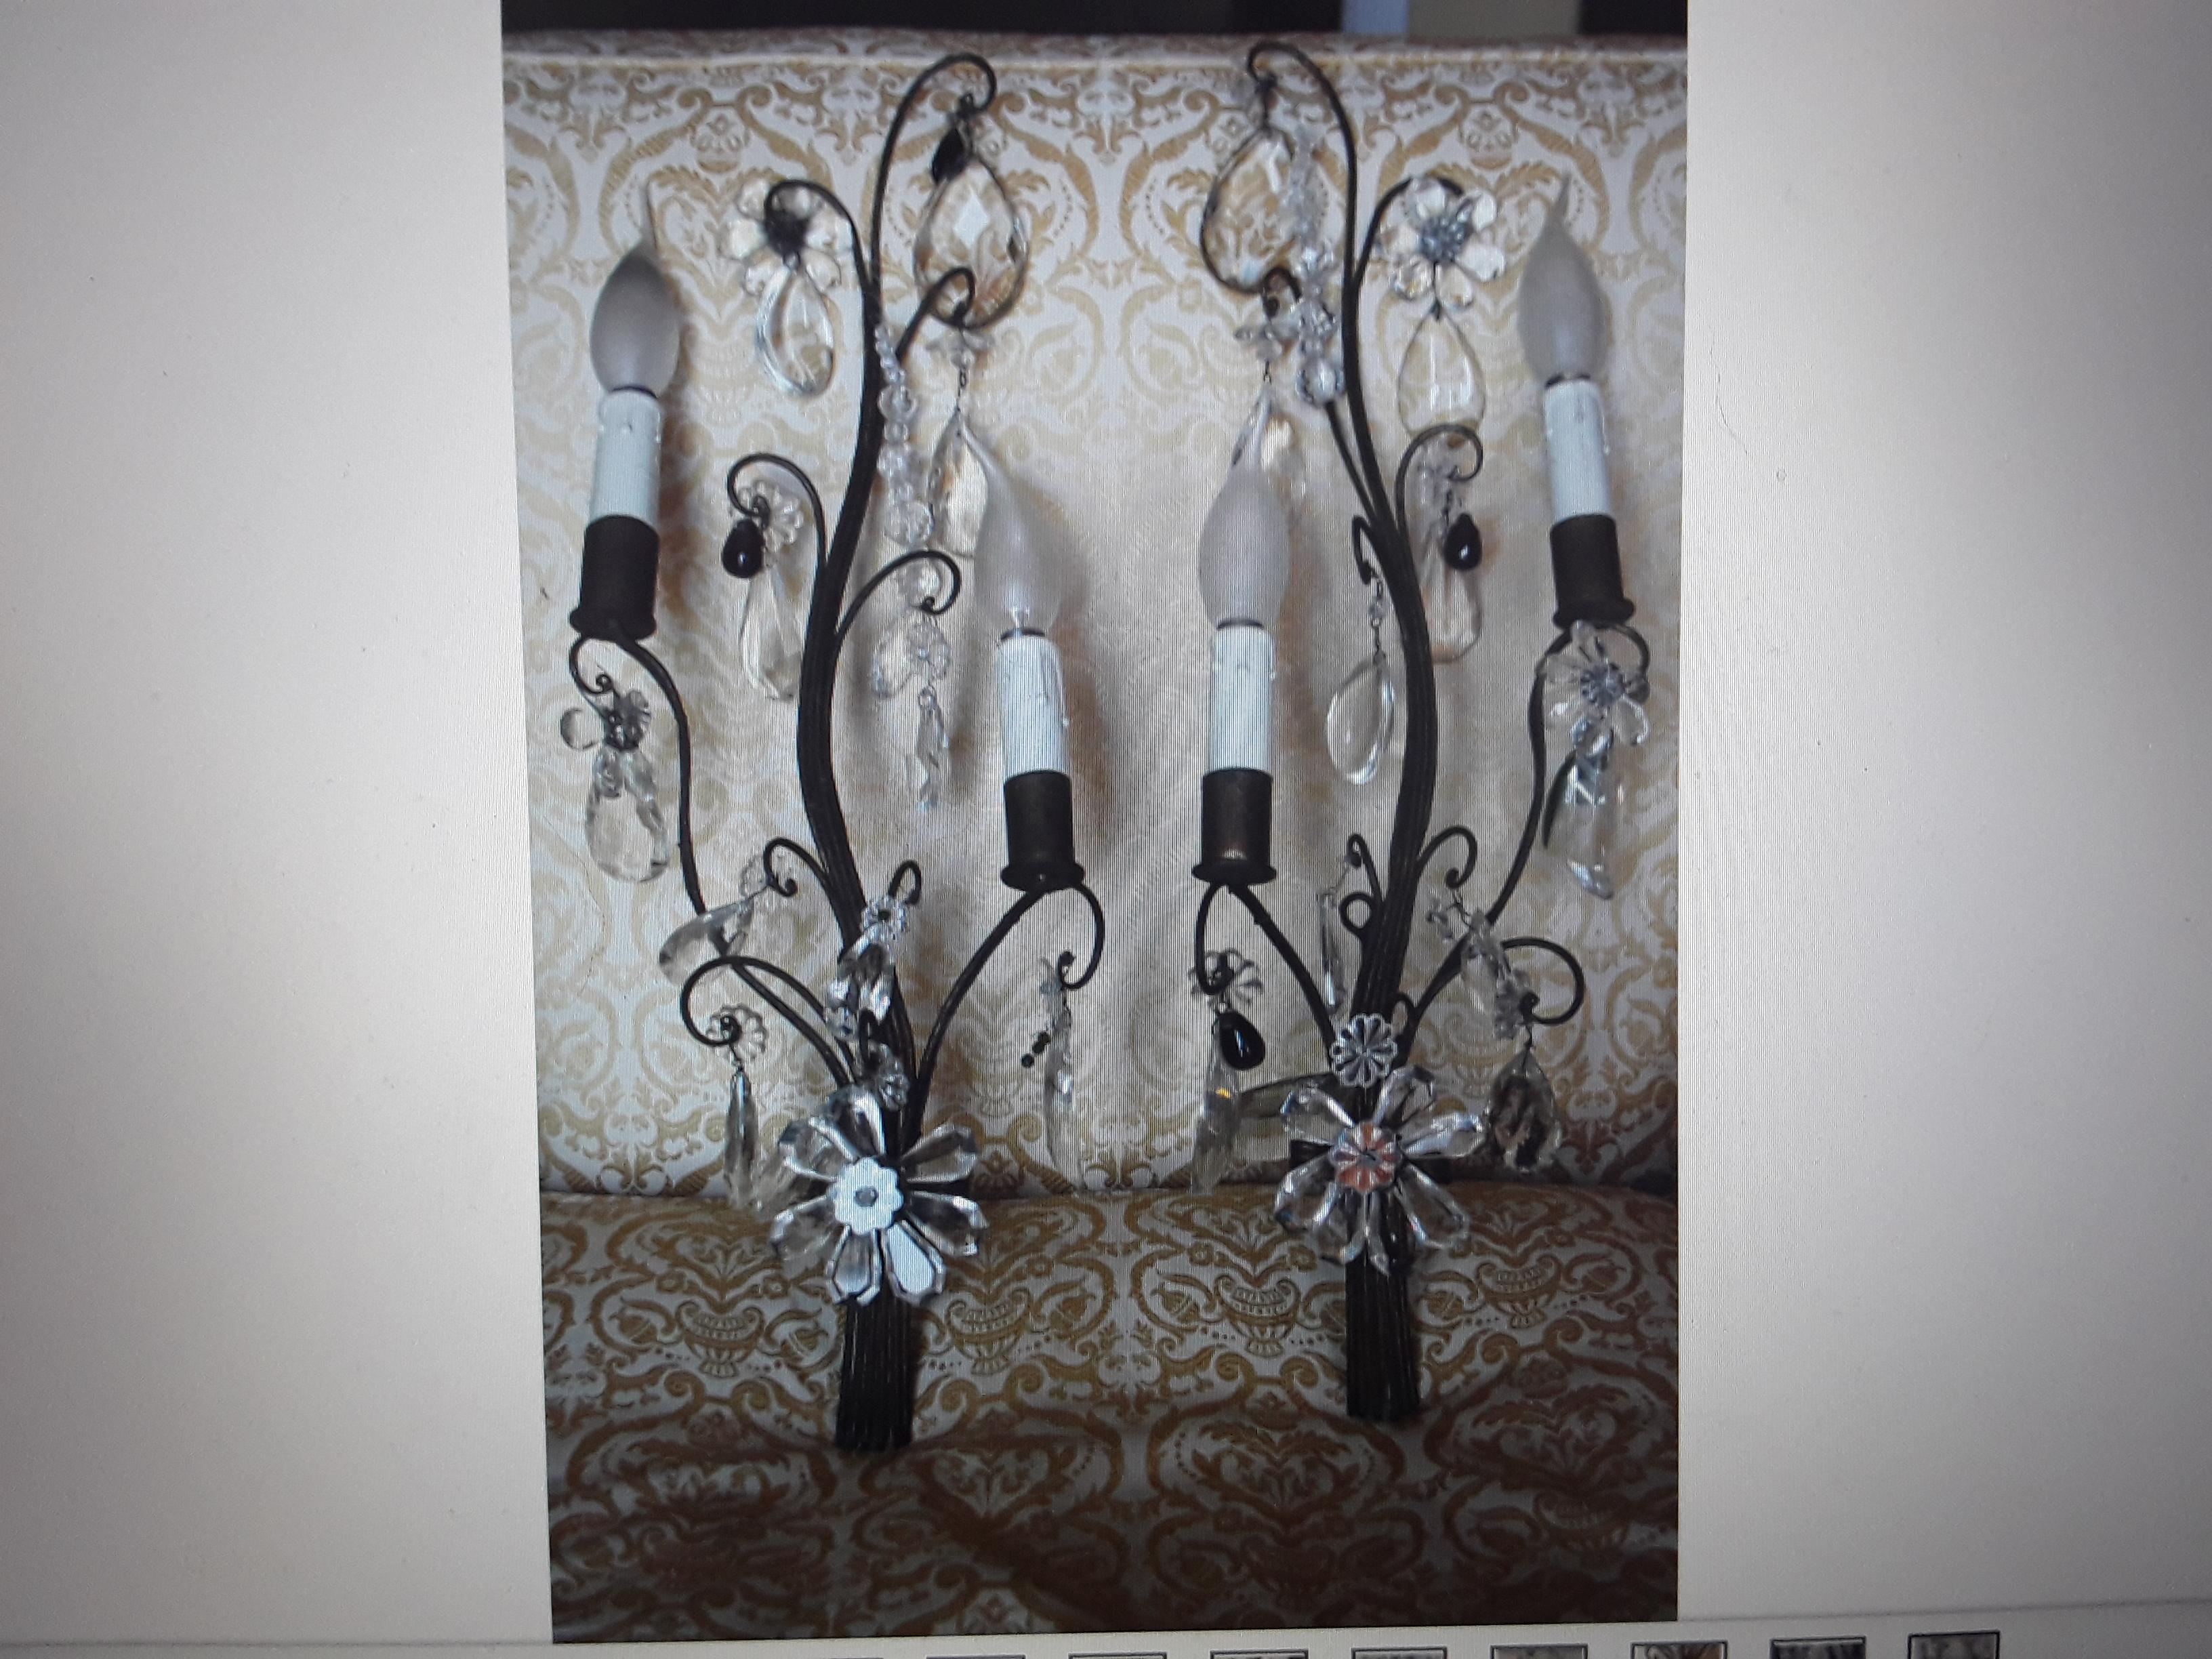 Pair French Hollywood Regency Stylized & Patinated Iron Decorated with Flowers and Cut Crystal Embellishment. Paris buying trip acquisition. These sconces are beautiful!